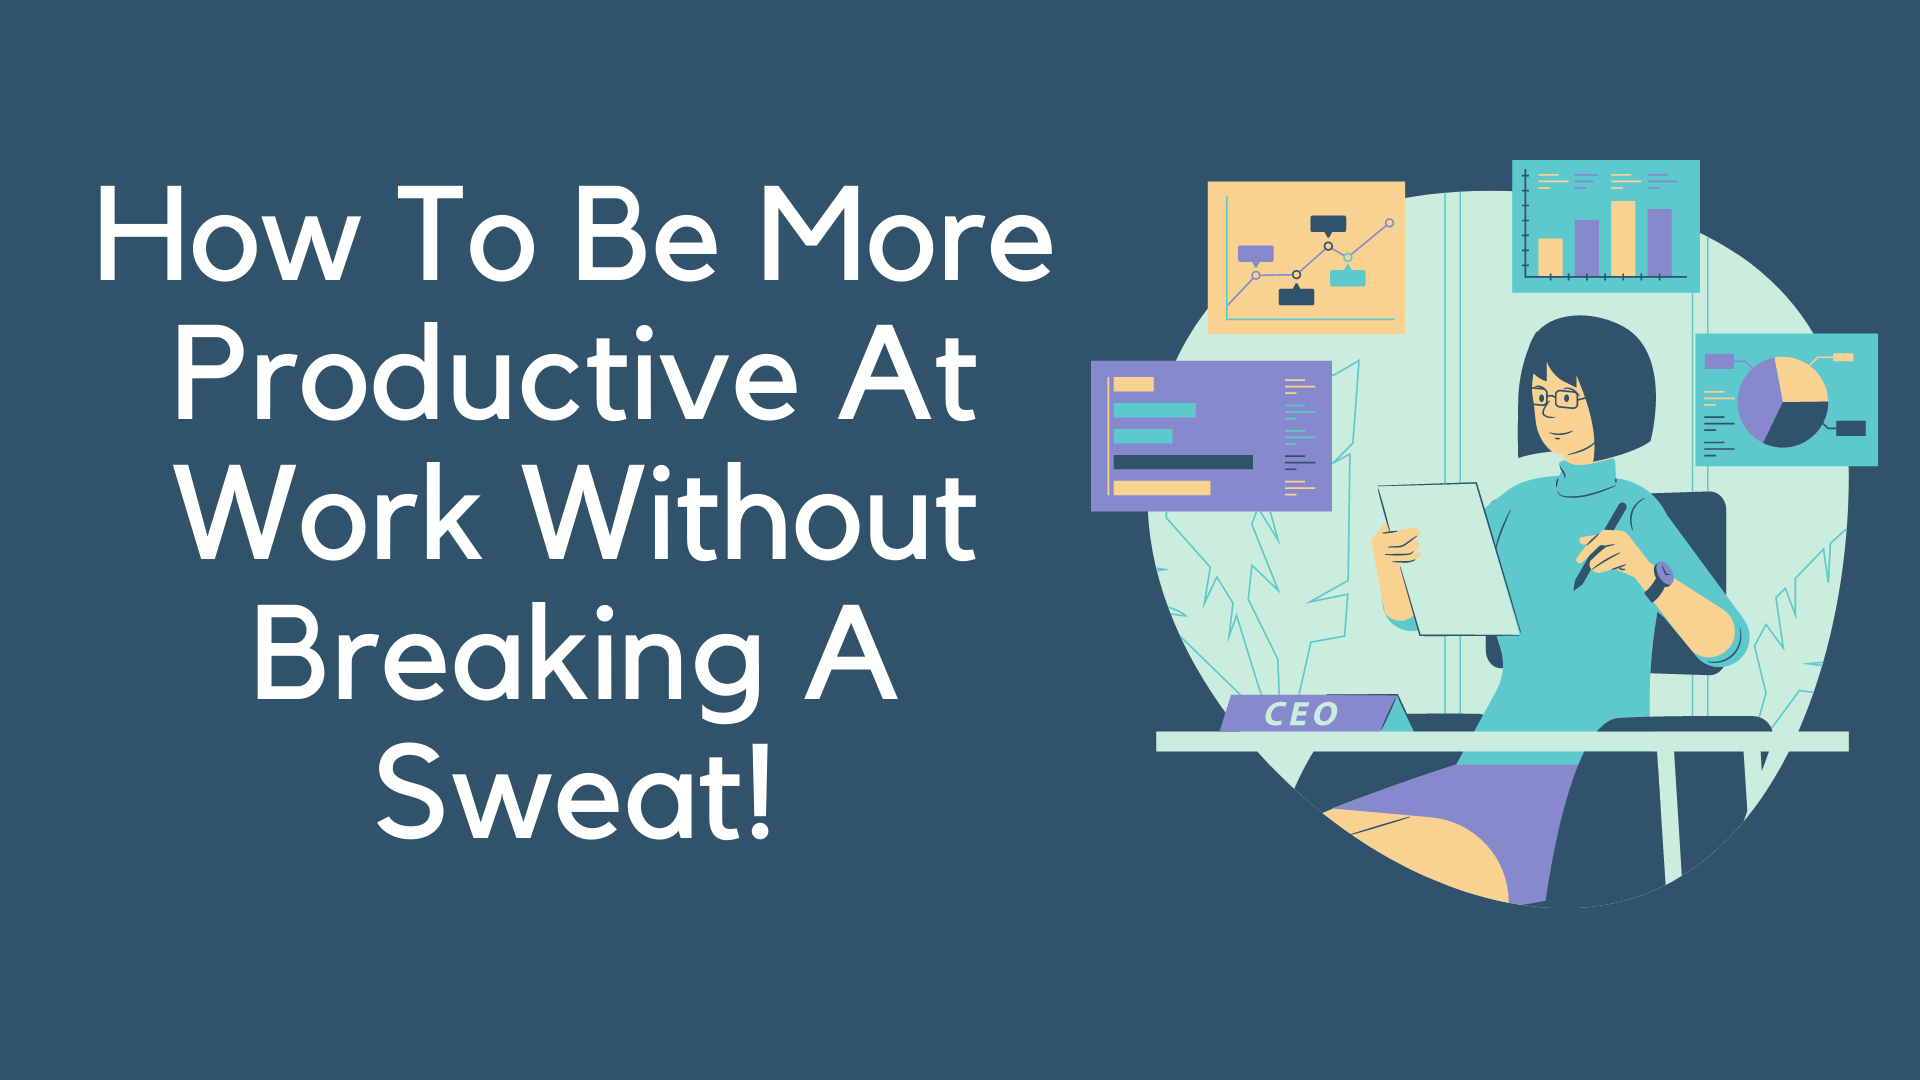 10 Ways To Be More Productive In The Workplace